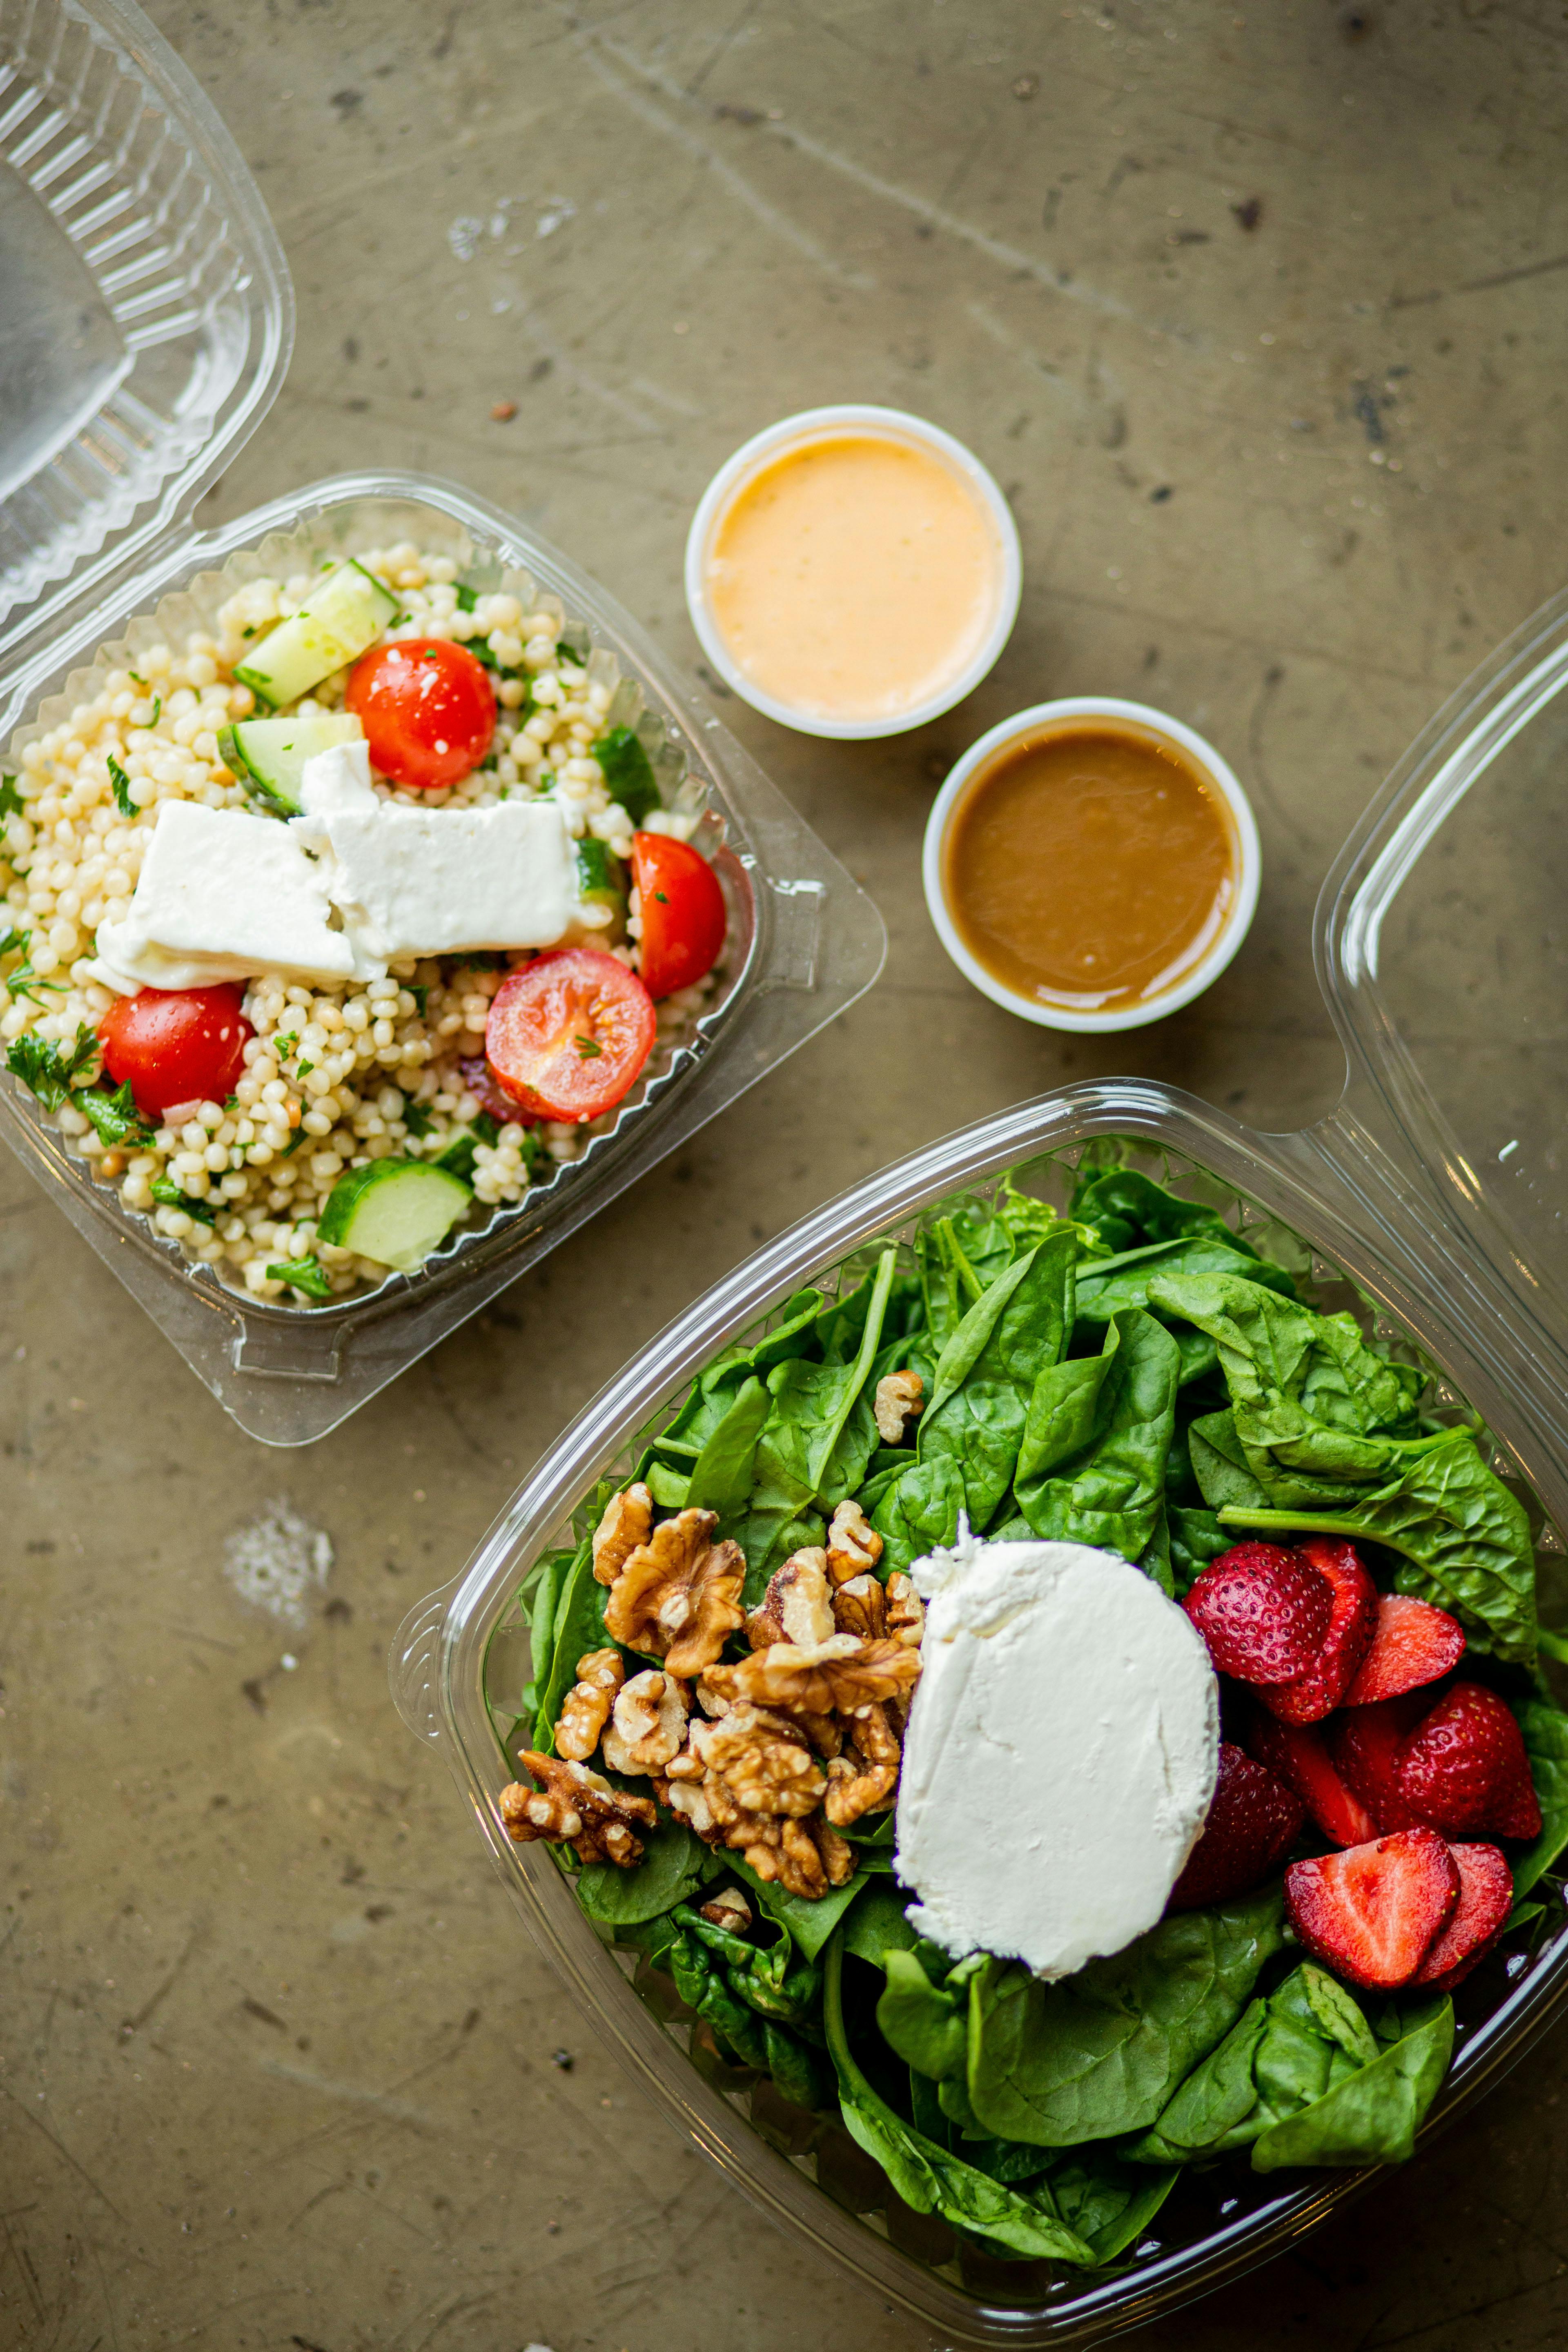 Exclusive salads with house-made dressing prepared only on pizza nights